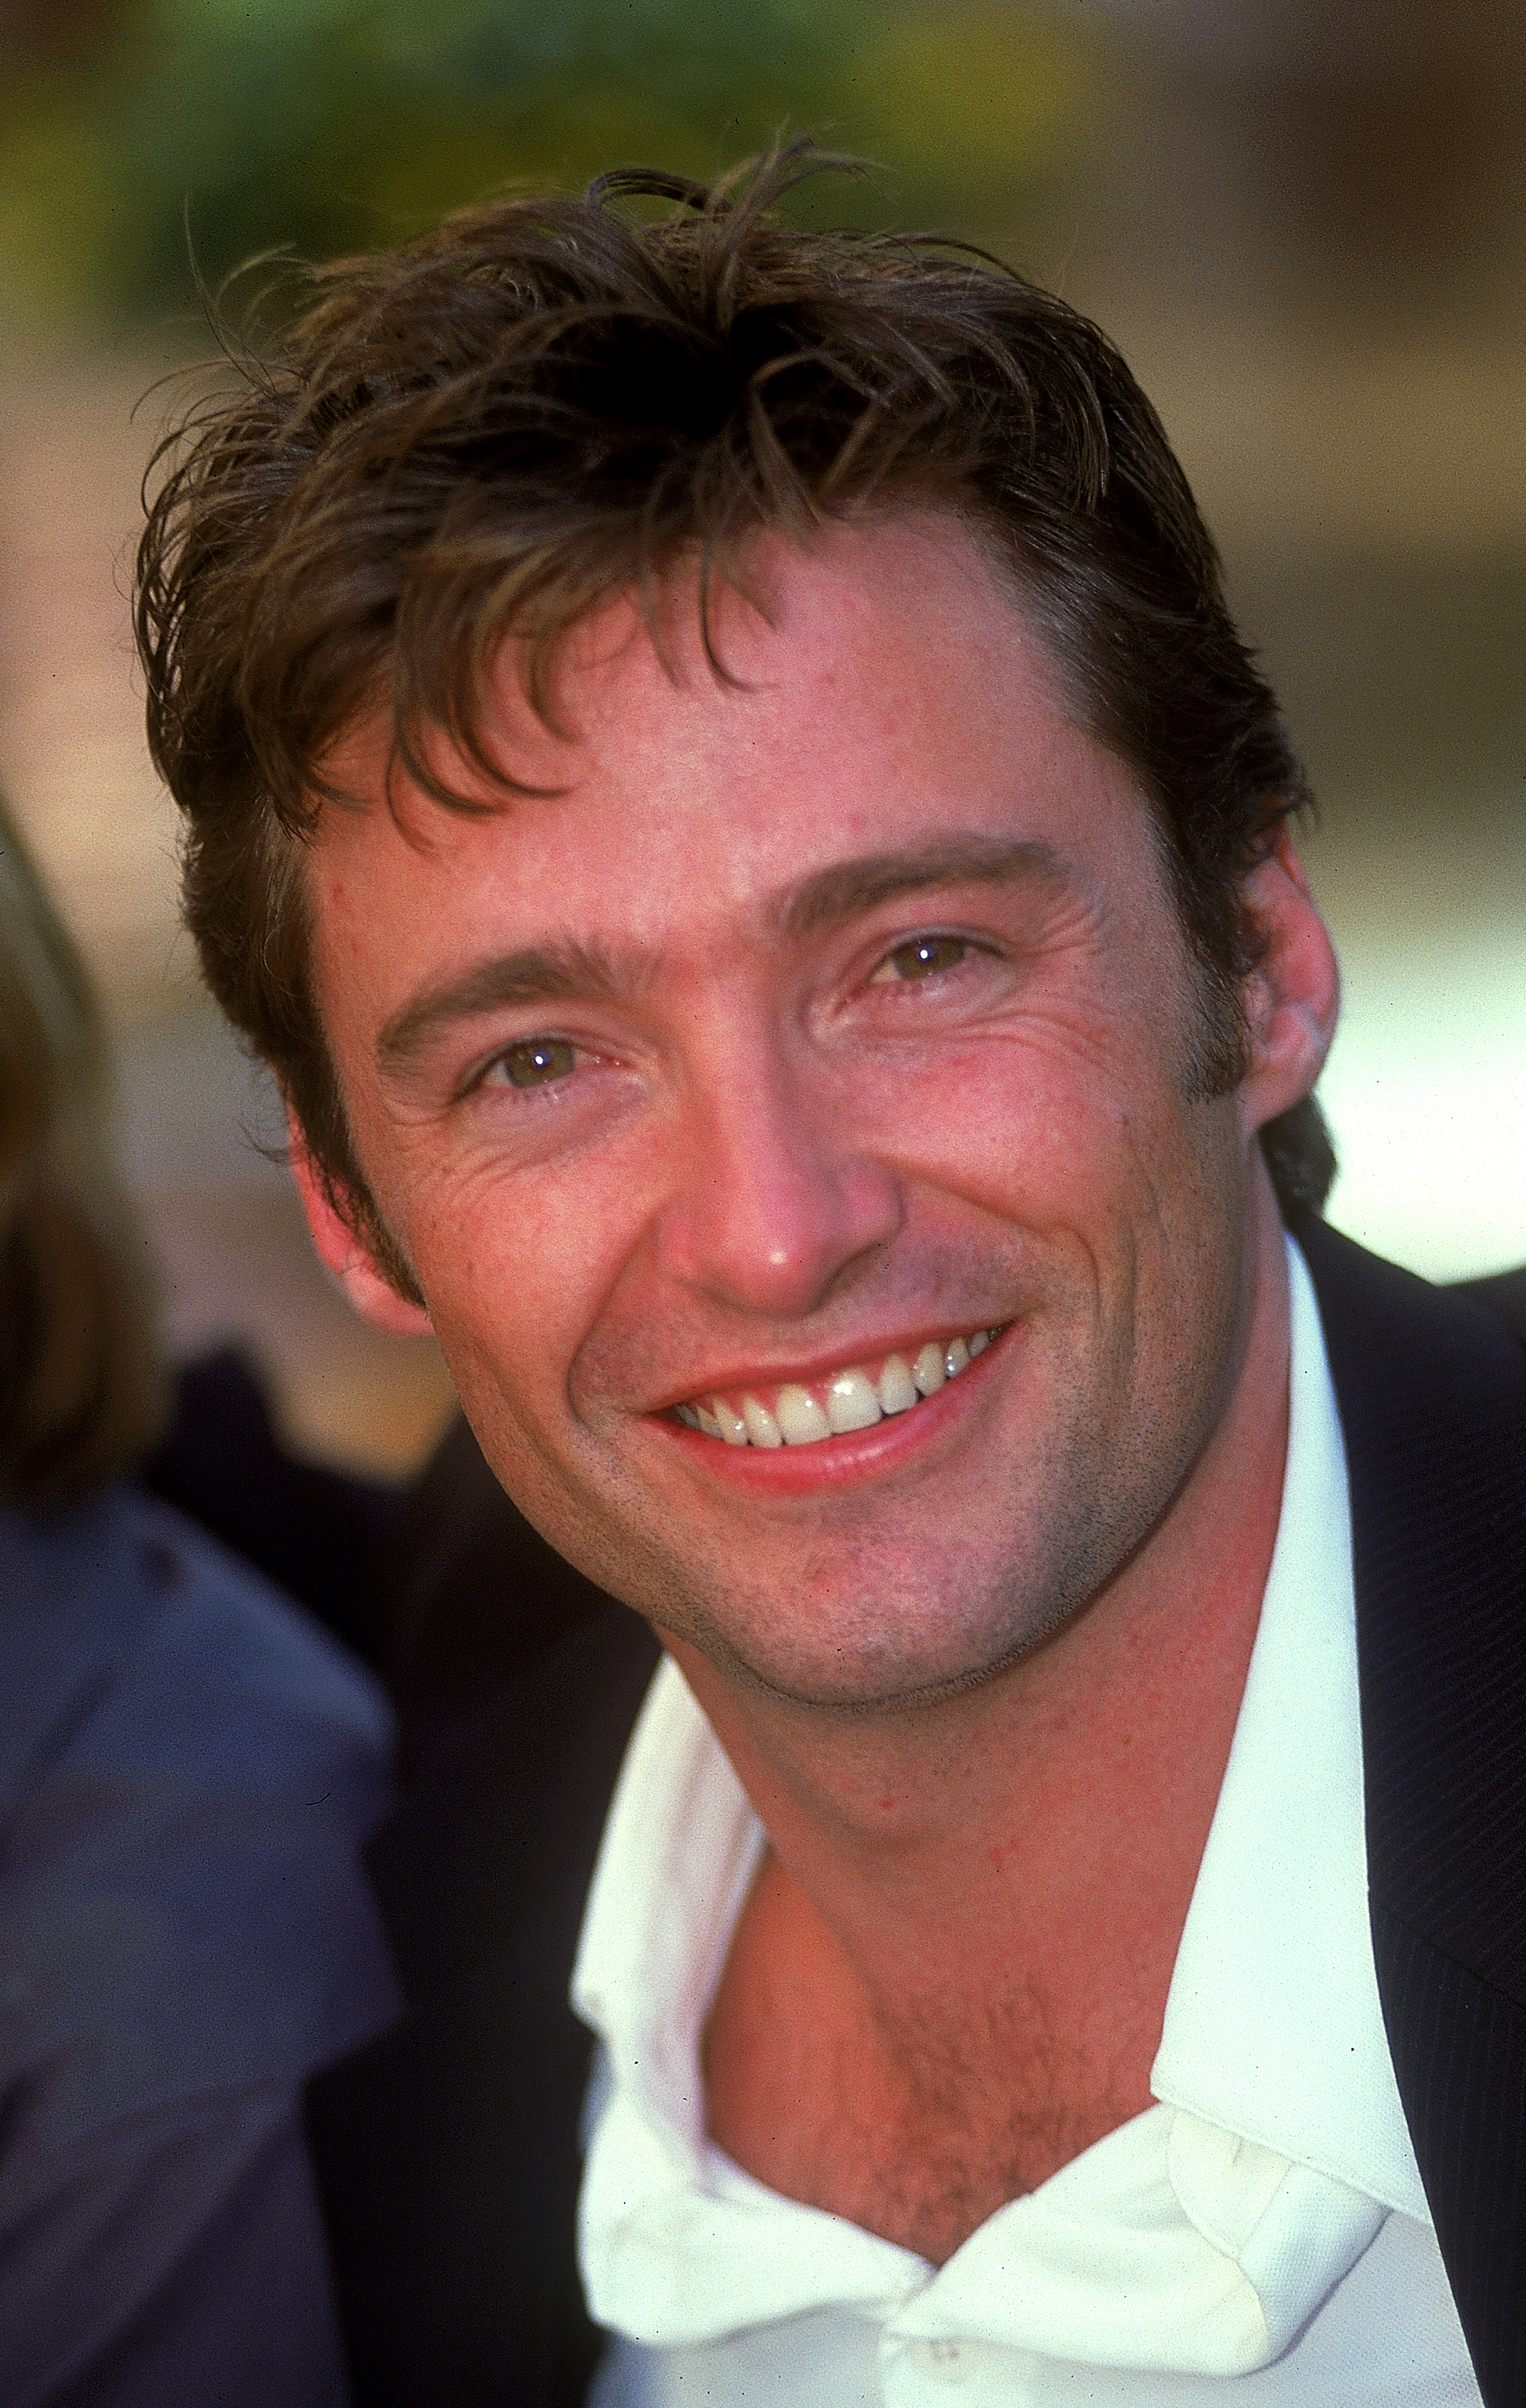 Hugh Jackman at the Noosa Flim Festival in Noosa, Australia on September 1, 1999 | Source: Getty Images